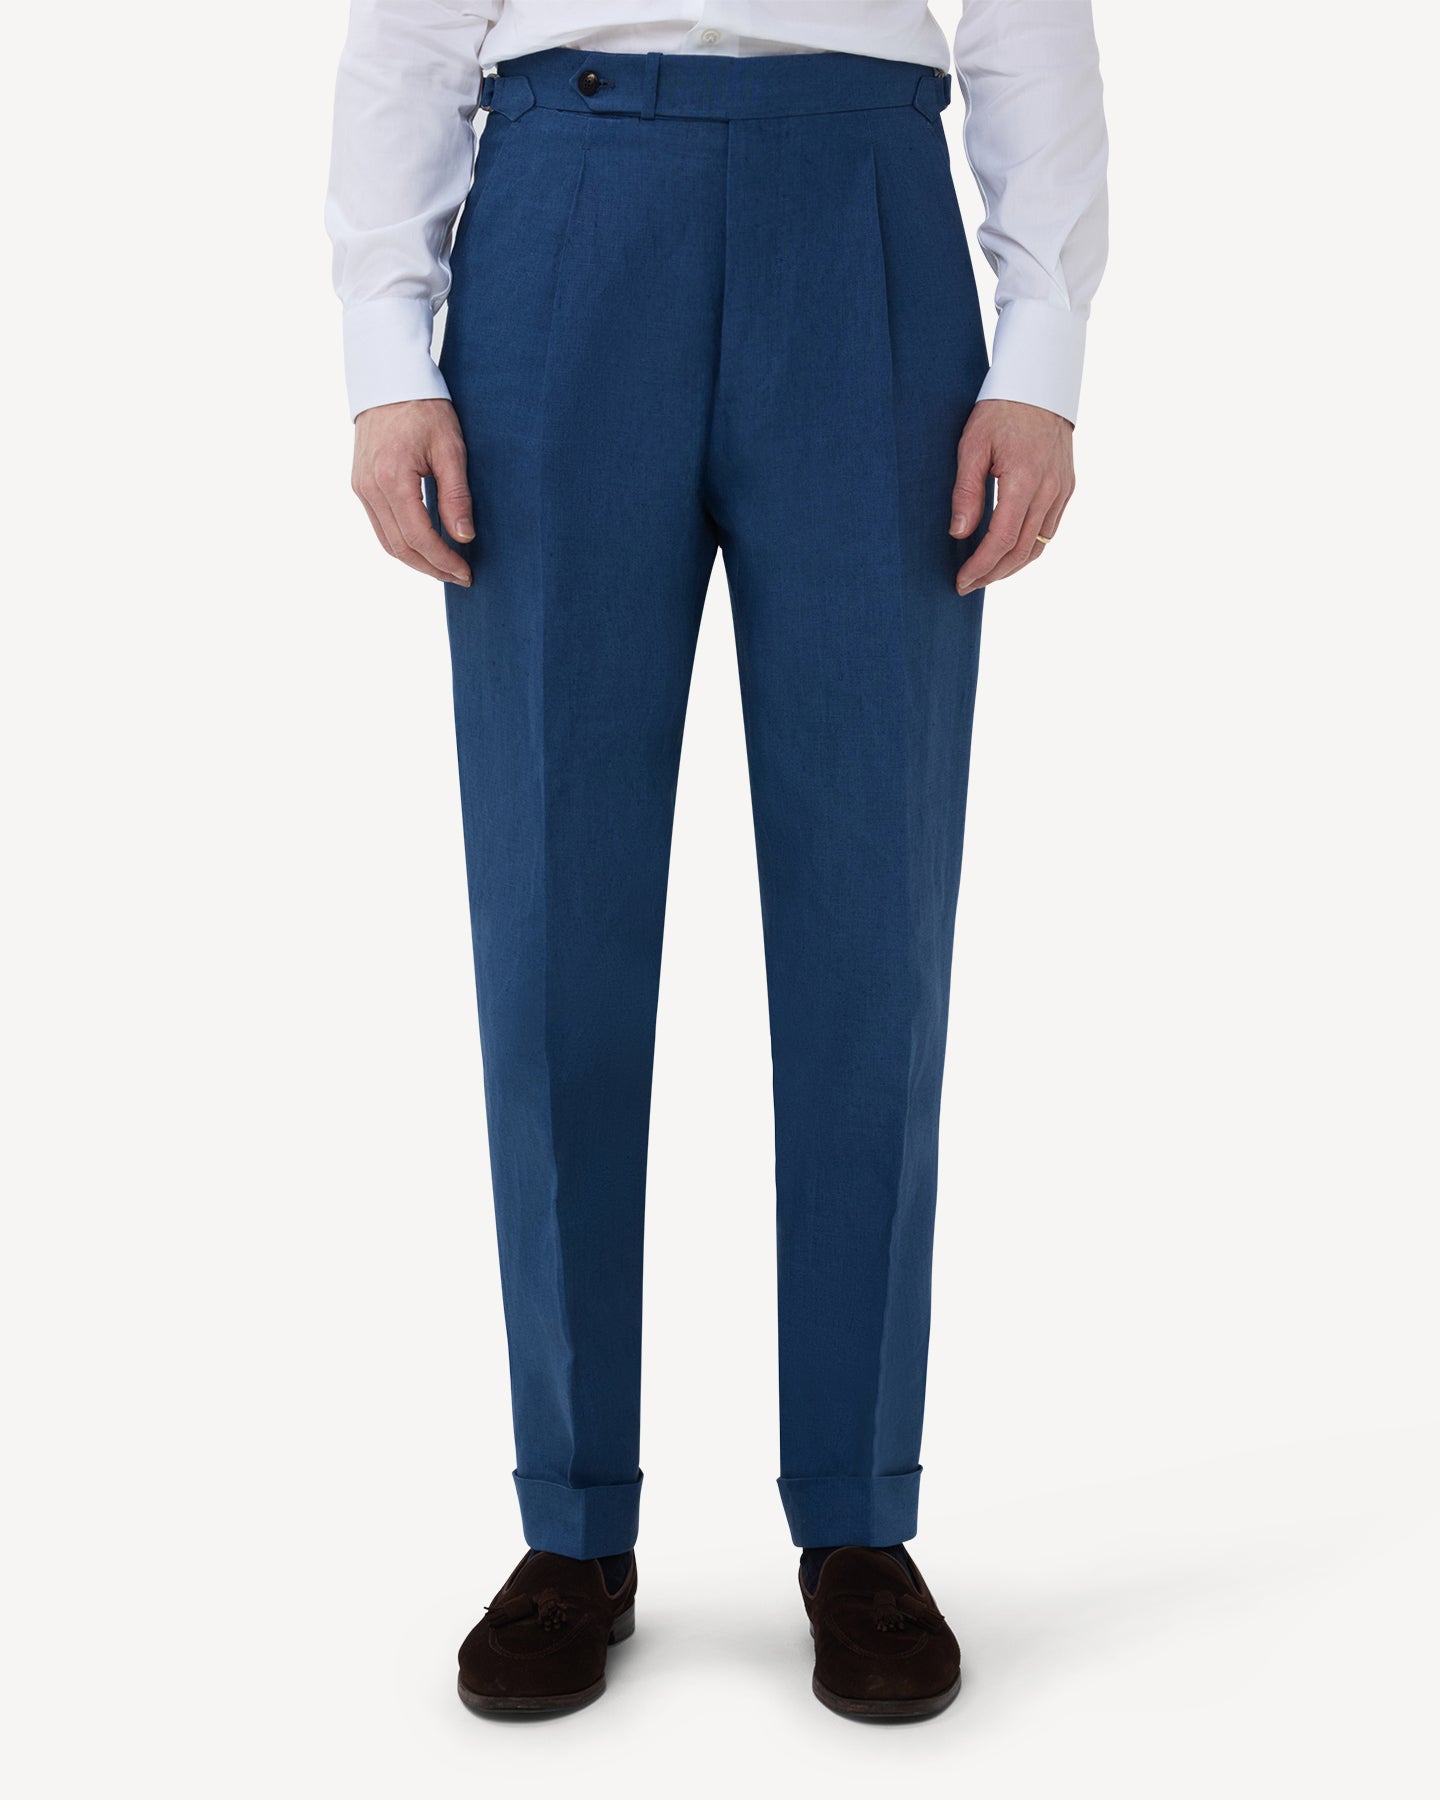 The front of blueberry linen trousers with single pleats and side adjusters